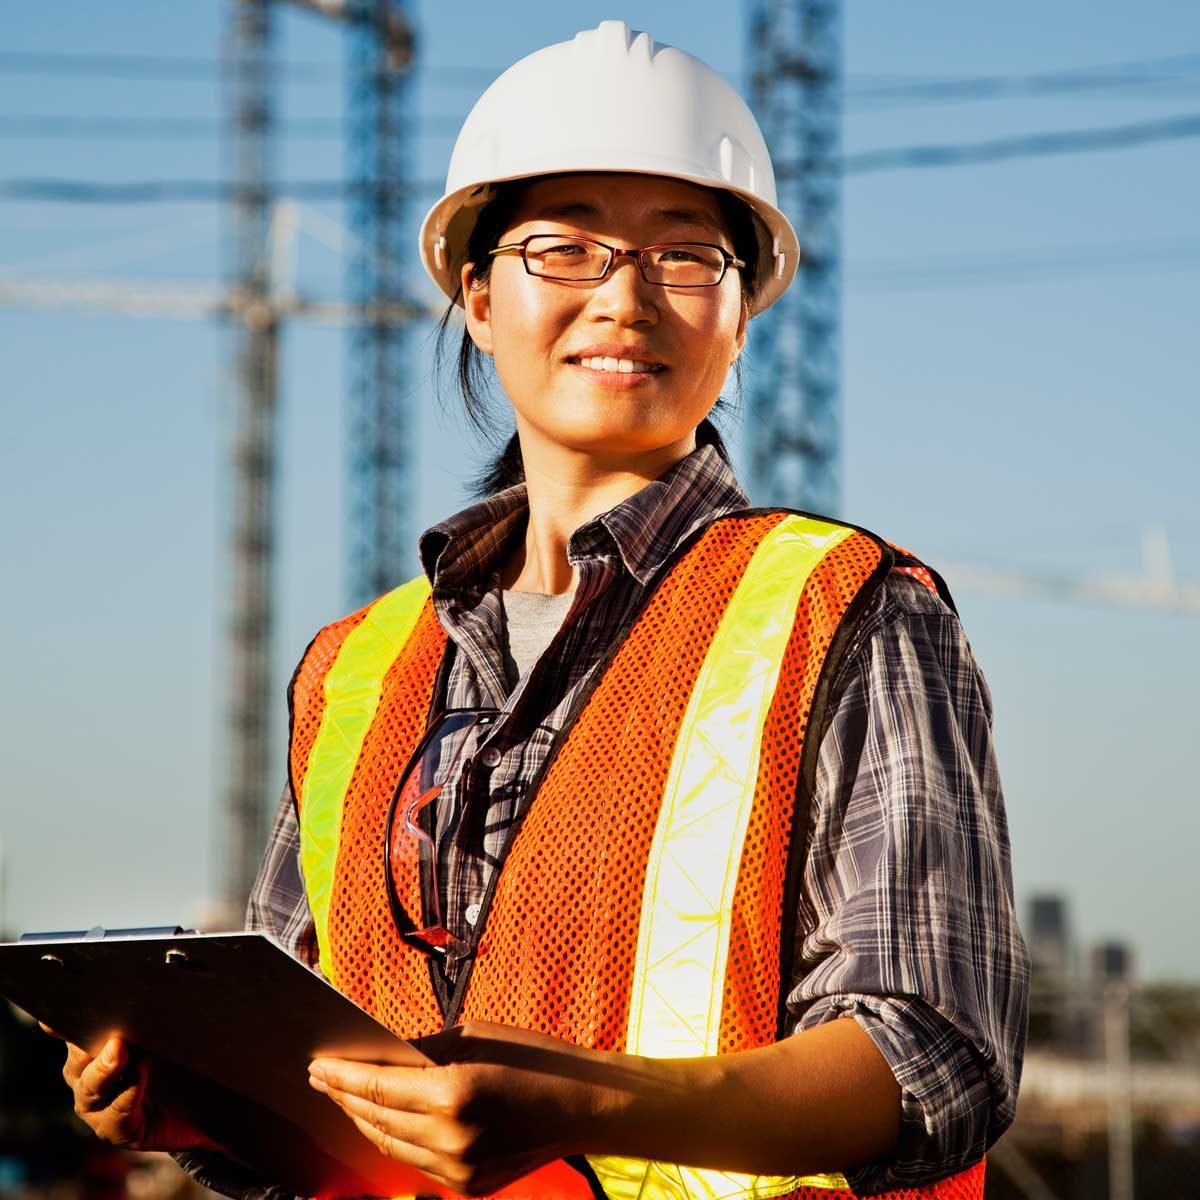 Woman Construction Worker Gettyimages 463207617